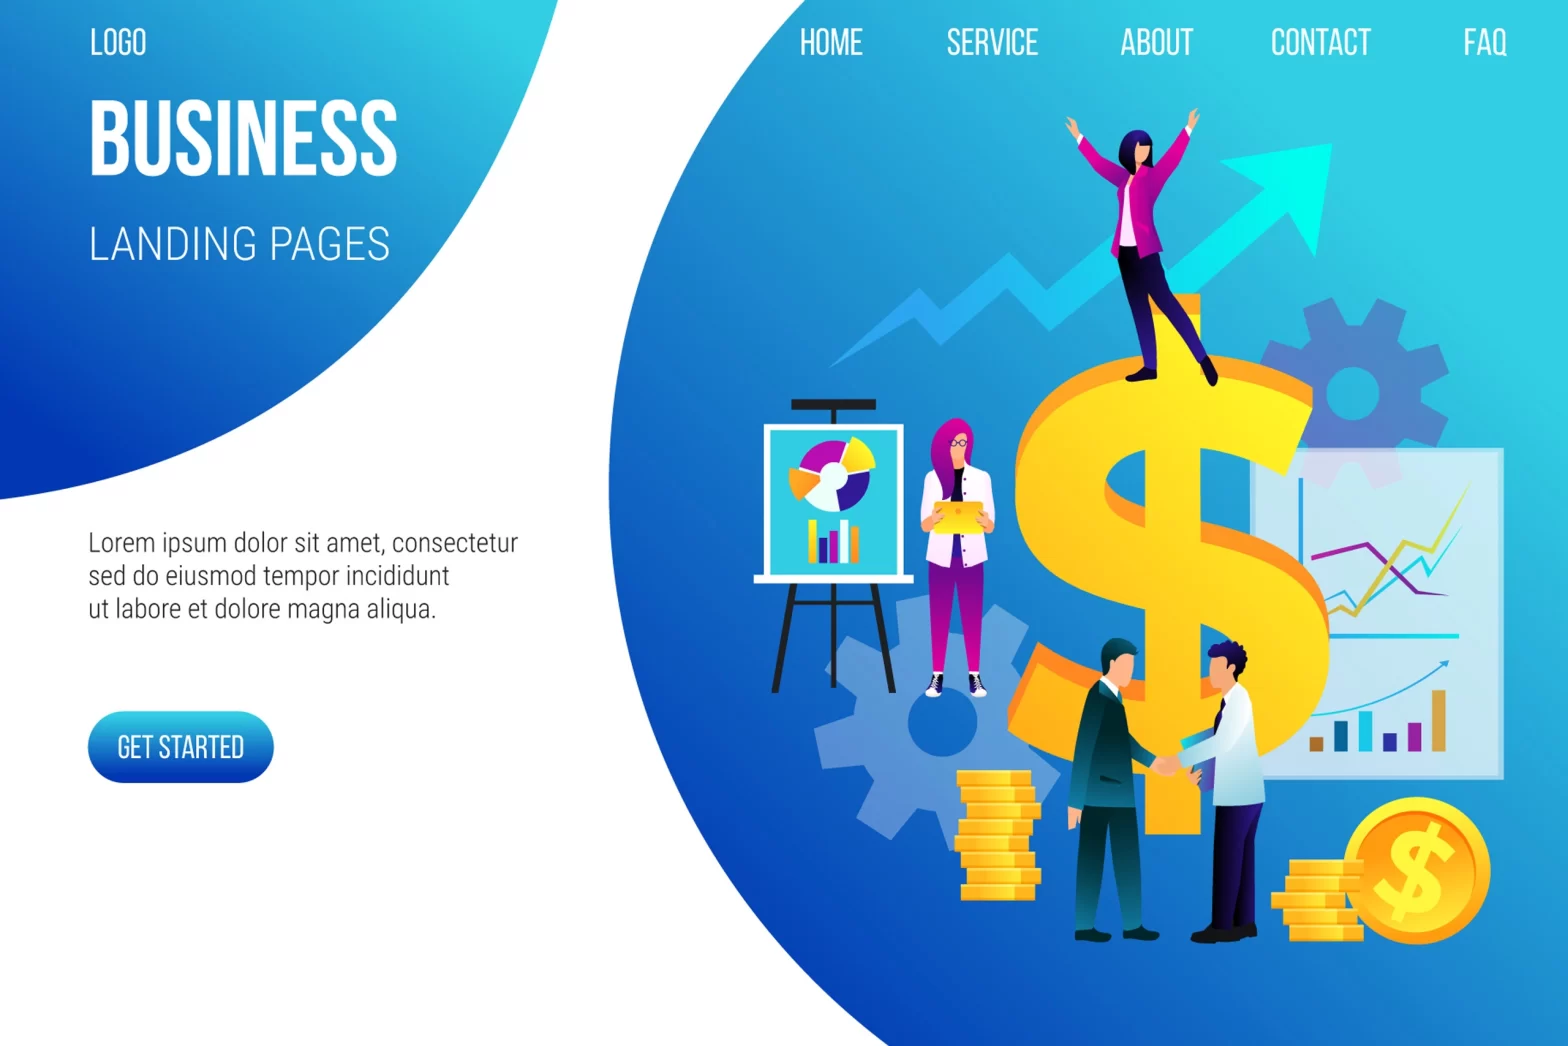 High-Quality Web Design That Fits Your Budget!